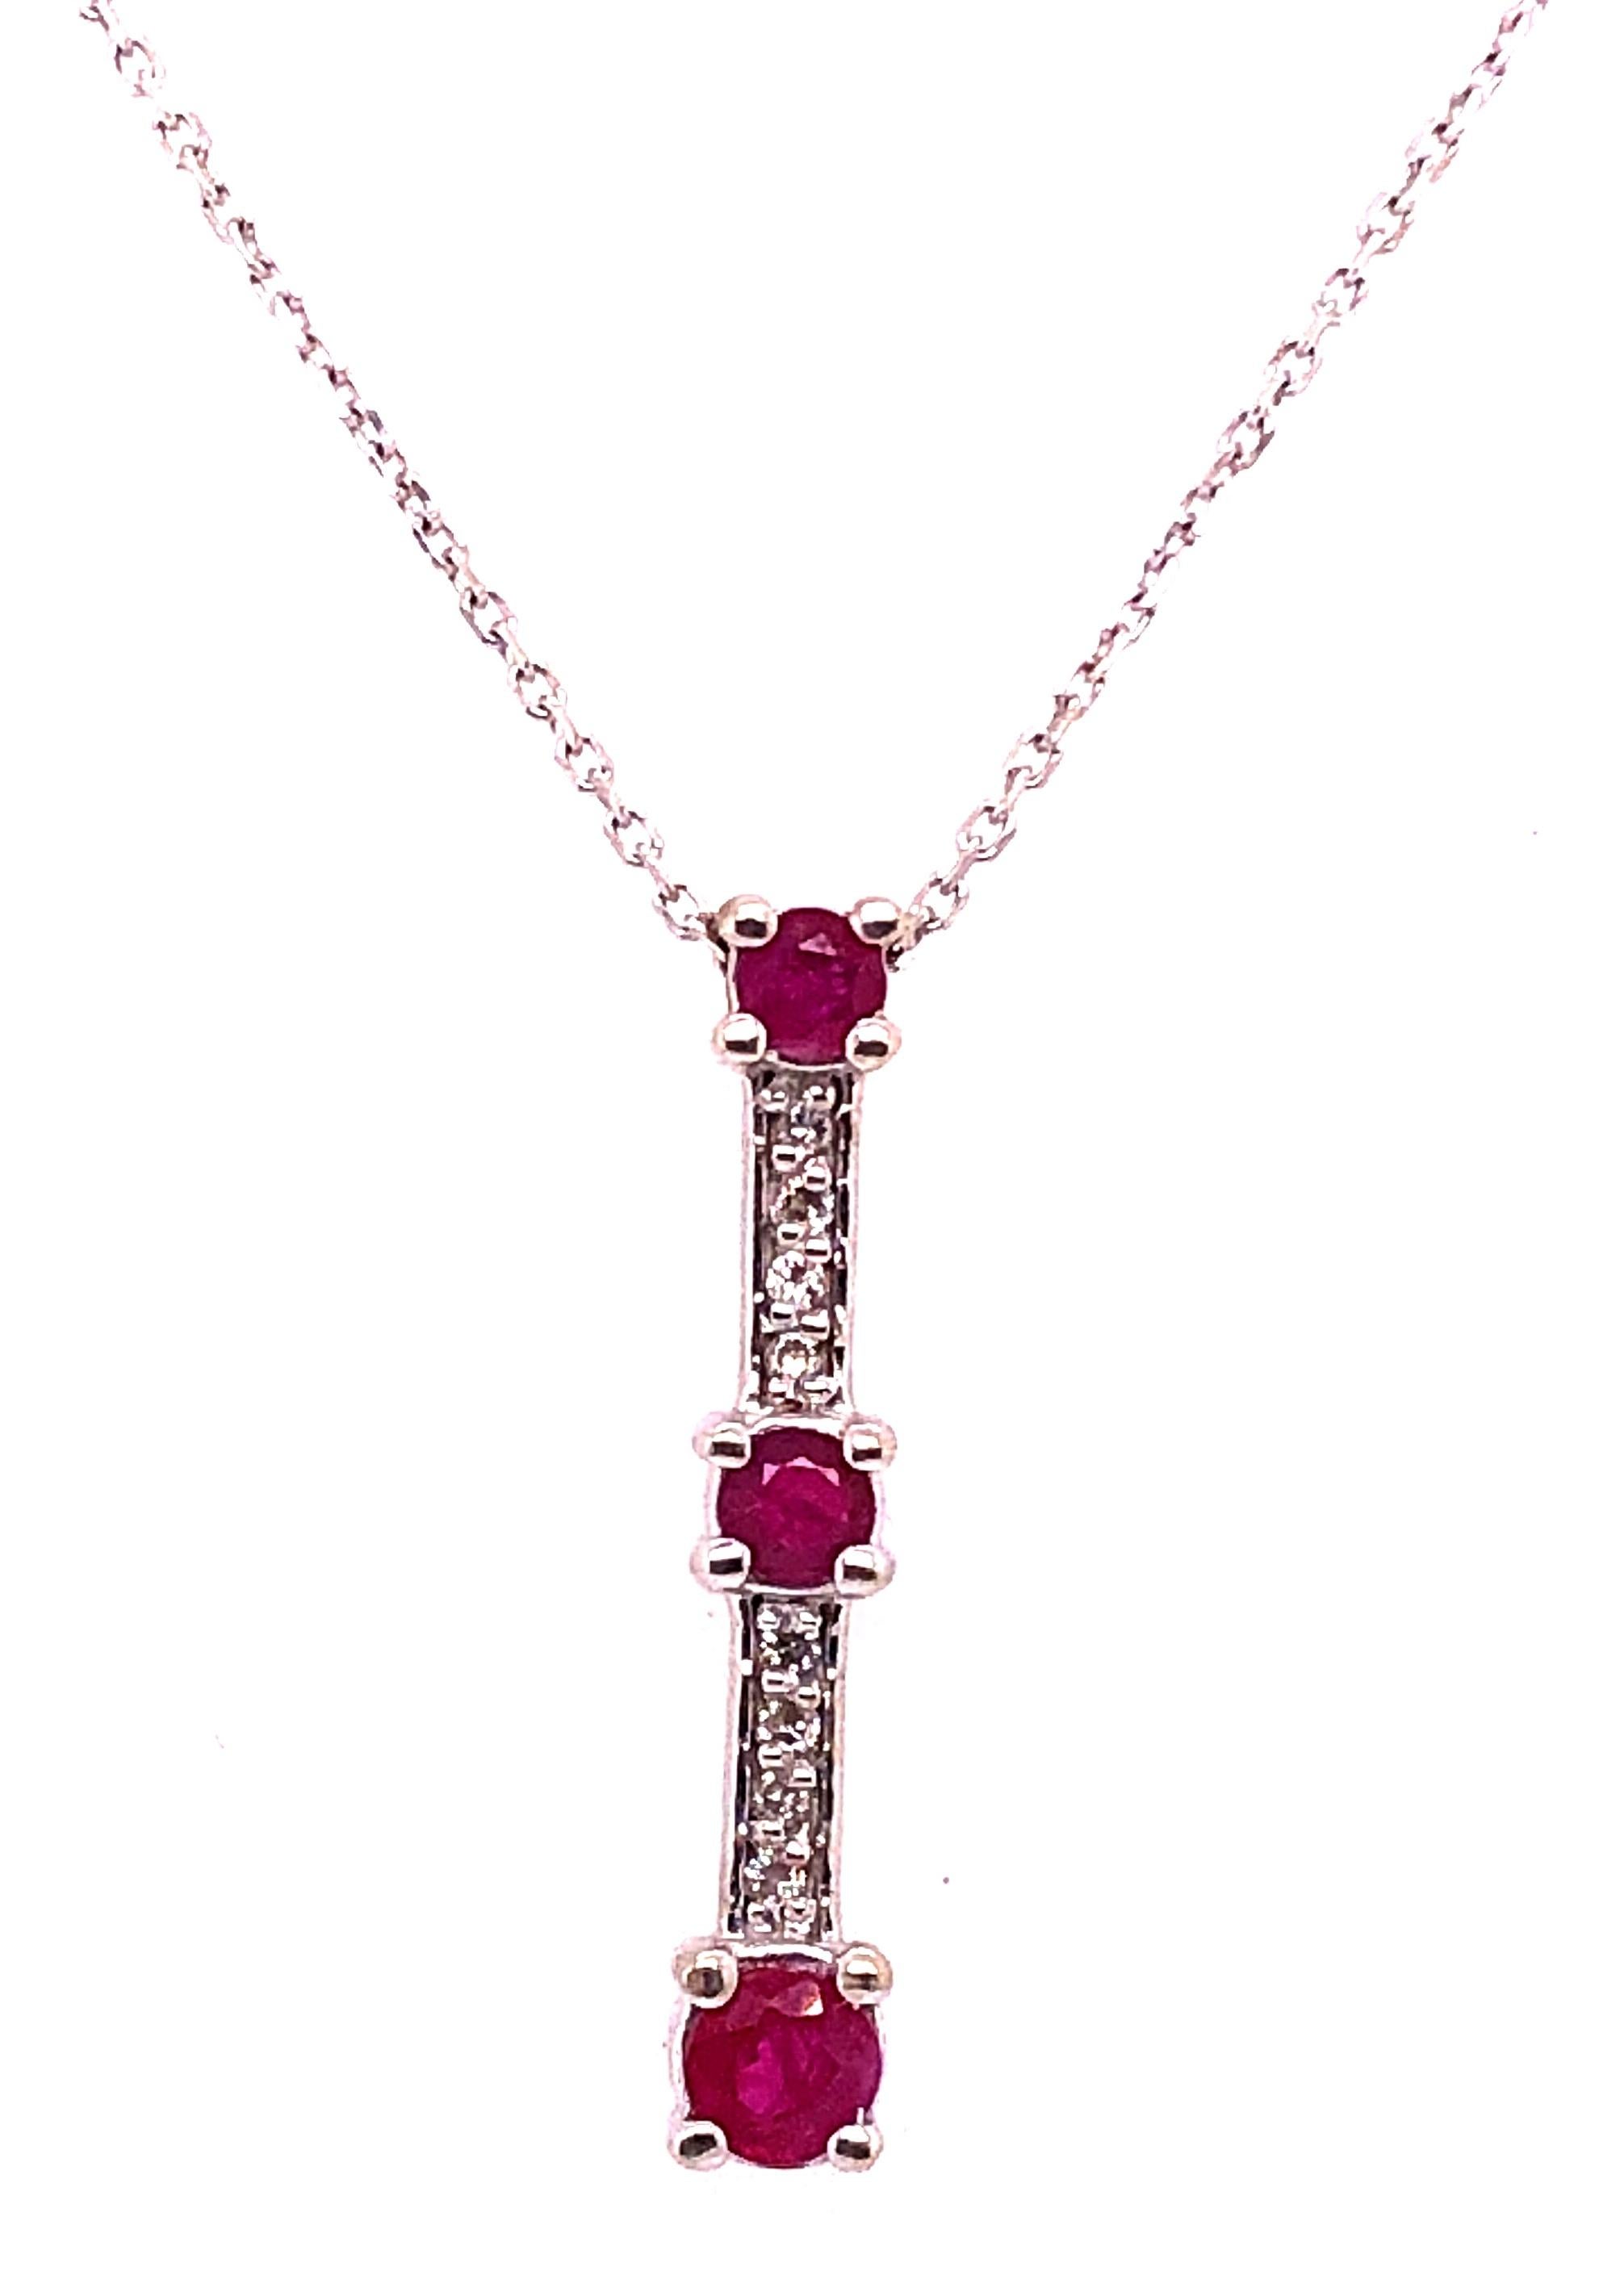 14 Karat White Gold 16 Inch Necklace with Semi Precious Stone Pendant.
2.98 gram total weight.
Stamped 585 Italy.